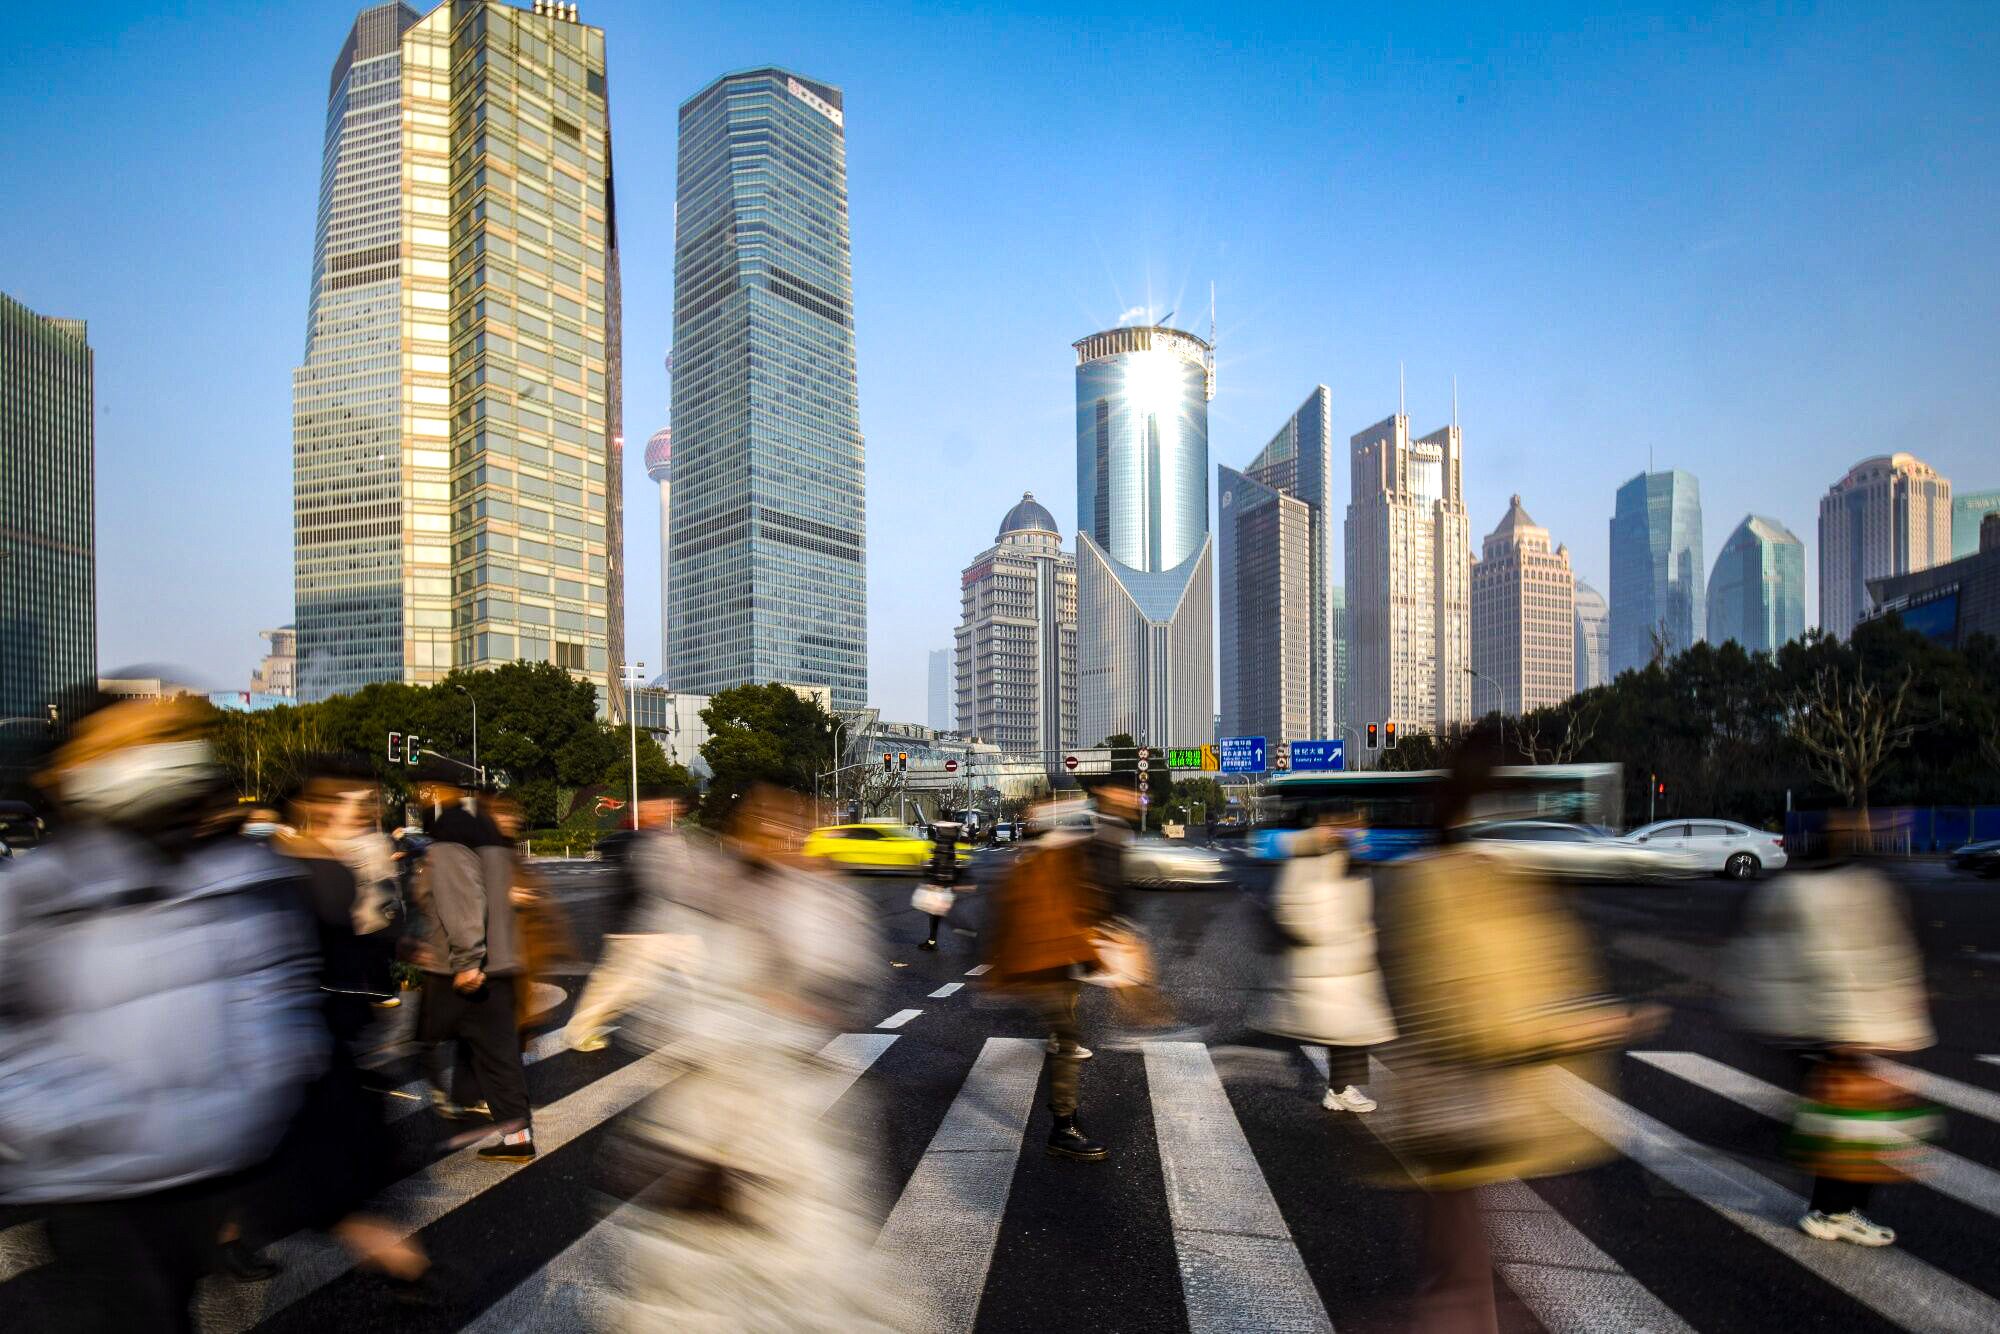 Pedestrians cross a road in the Lujiazui financial district in Shanghai. China is planning to cap the salaries of finance executives. Photo: Bloomberg